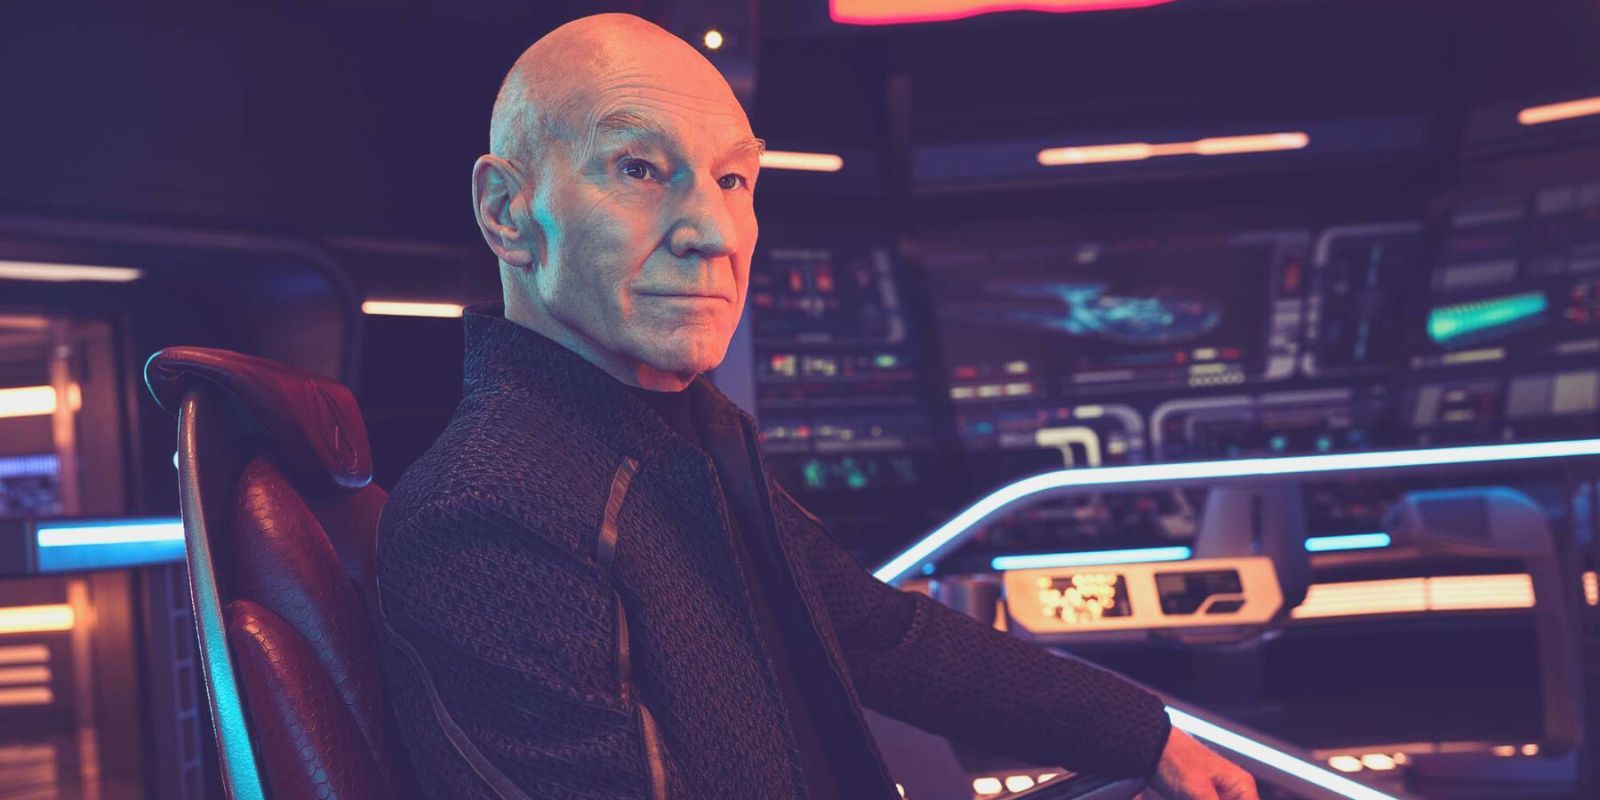 Captain Picard looking serious in a chair